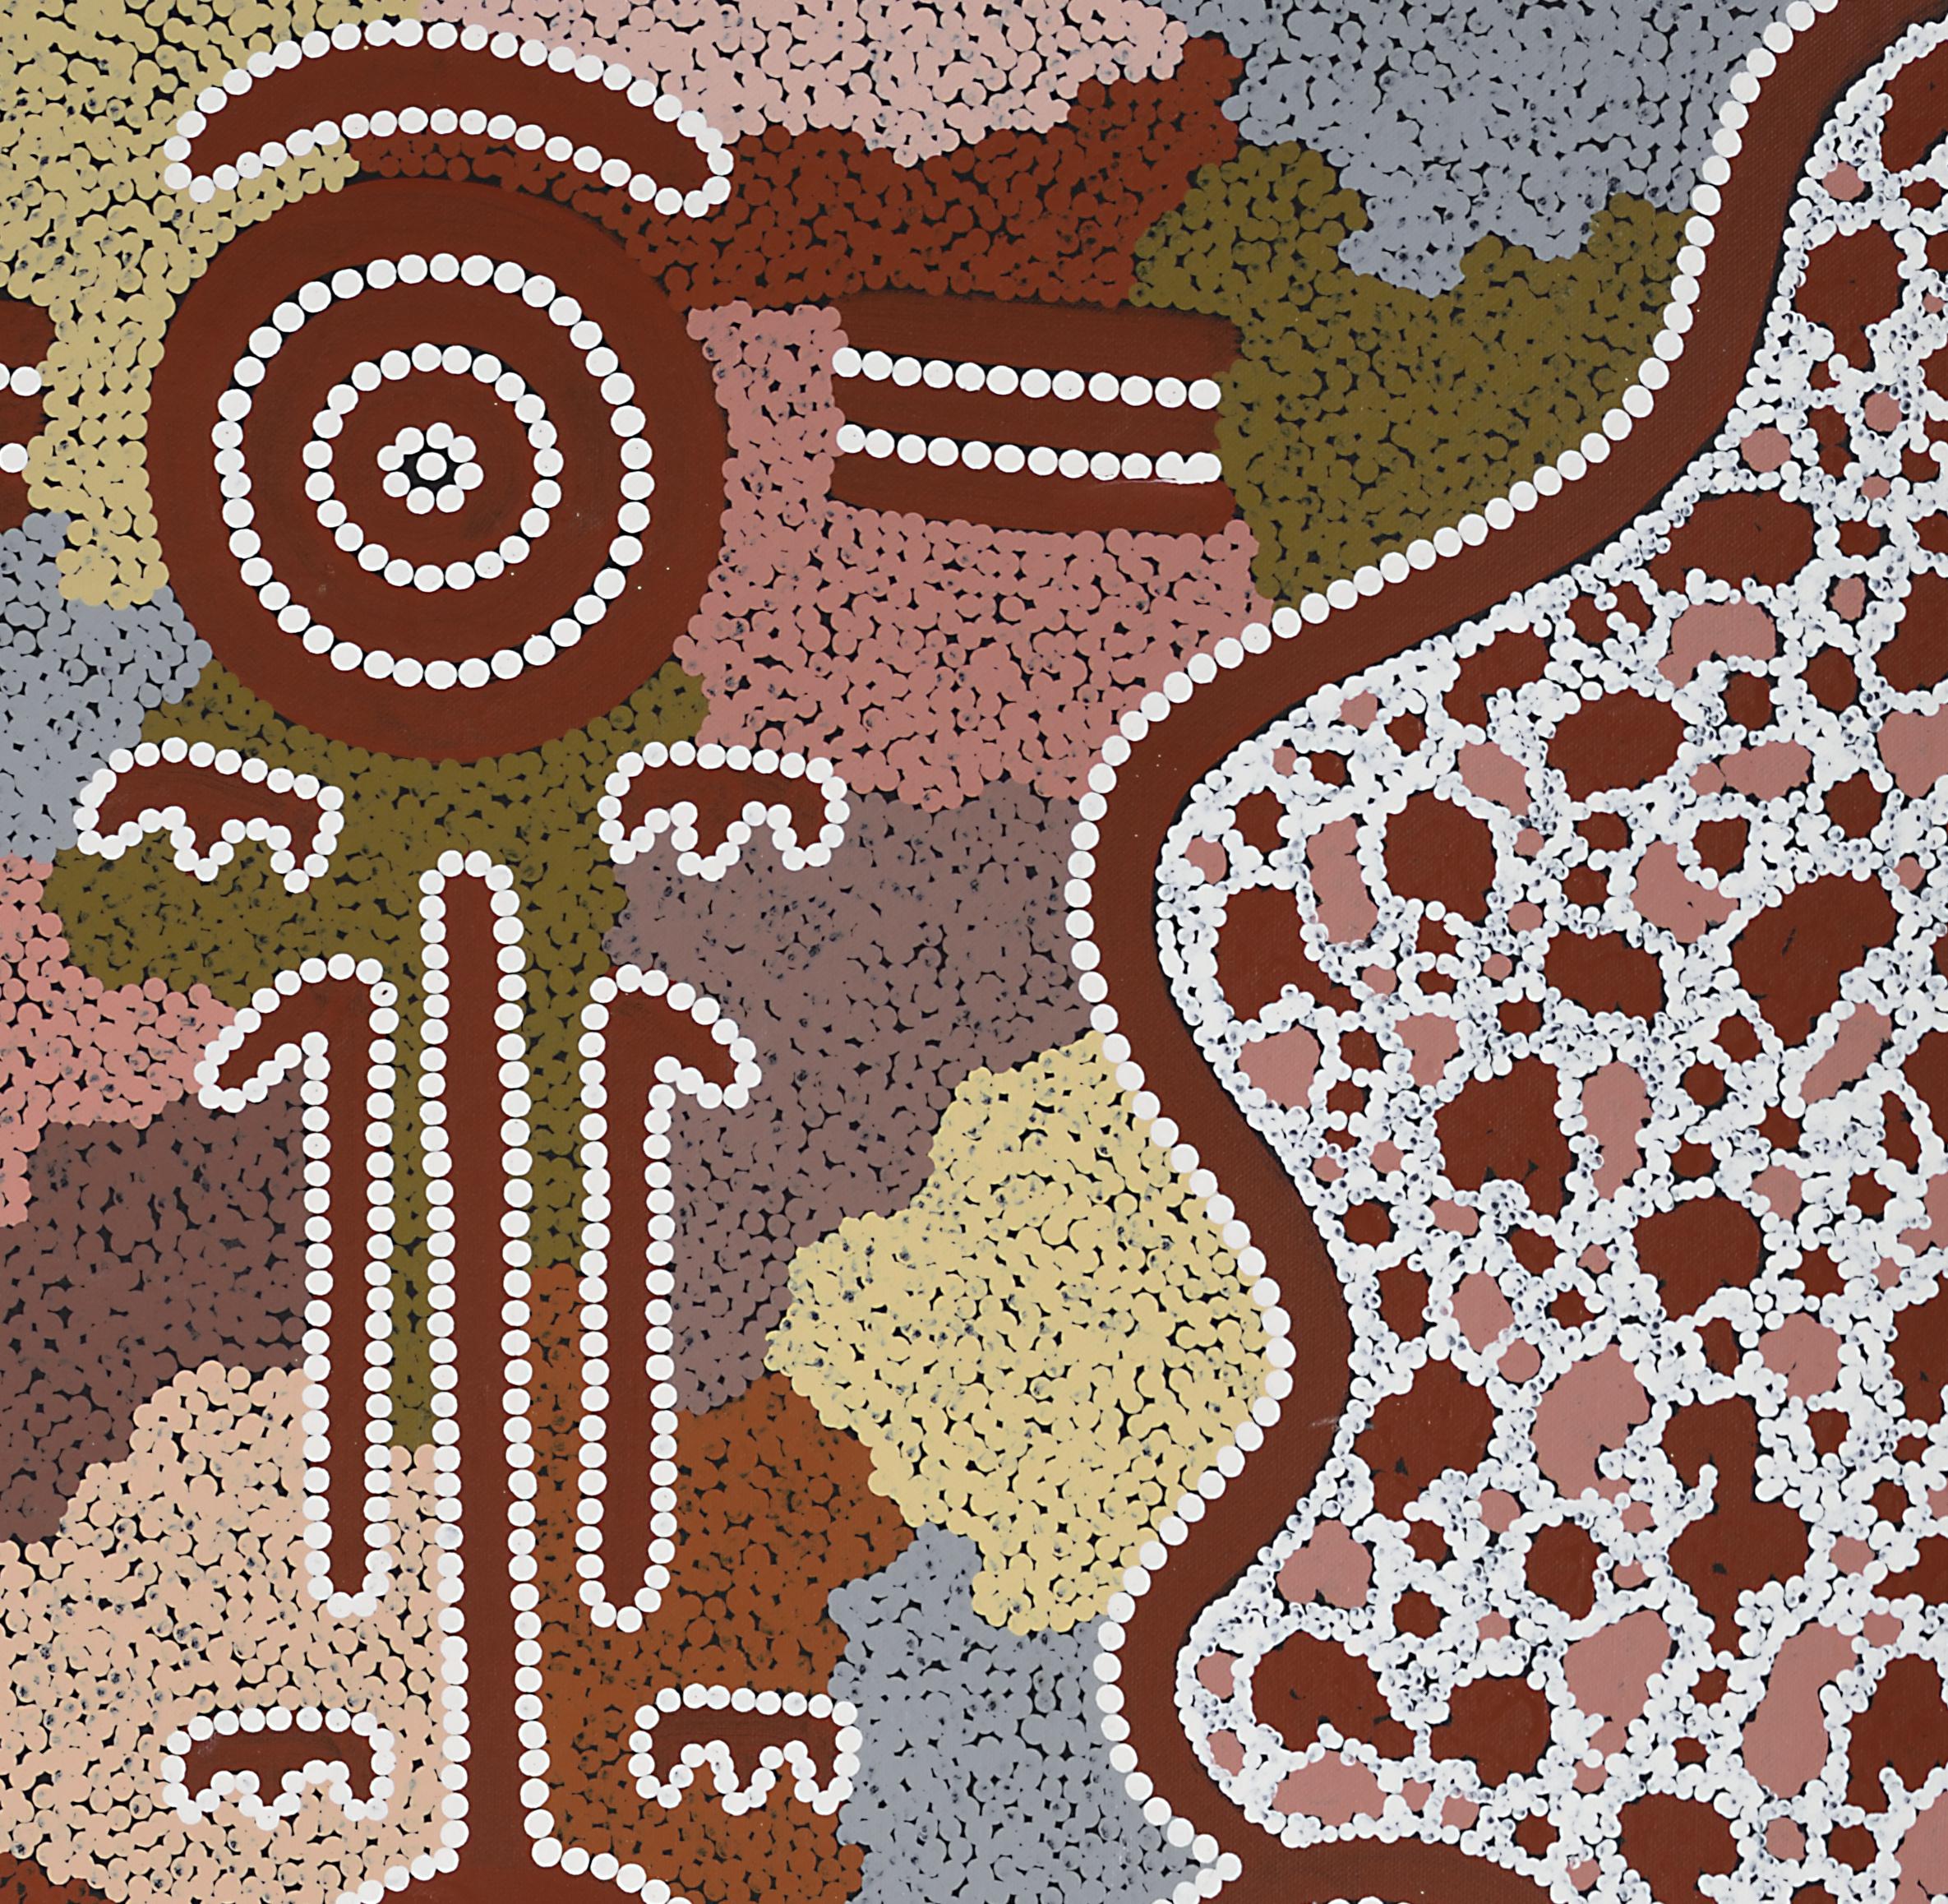 Michael Nelson Tjakamarra (also cited as: Michael Nelson Jagamarra, or Jakamara) is a Senior Warlpiri Tribesman and an Elder of the Papunya Community in central Australia. Born c. 1949 at Pikilyi, Vaughan Springs west of Yuendumu in the Northern